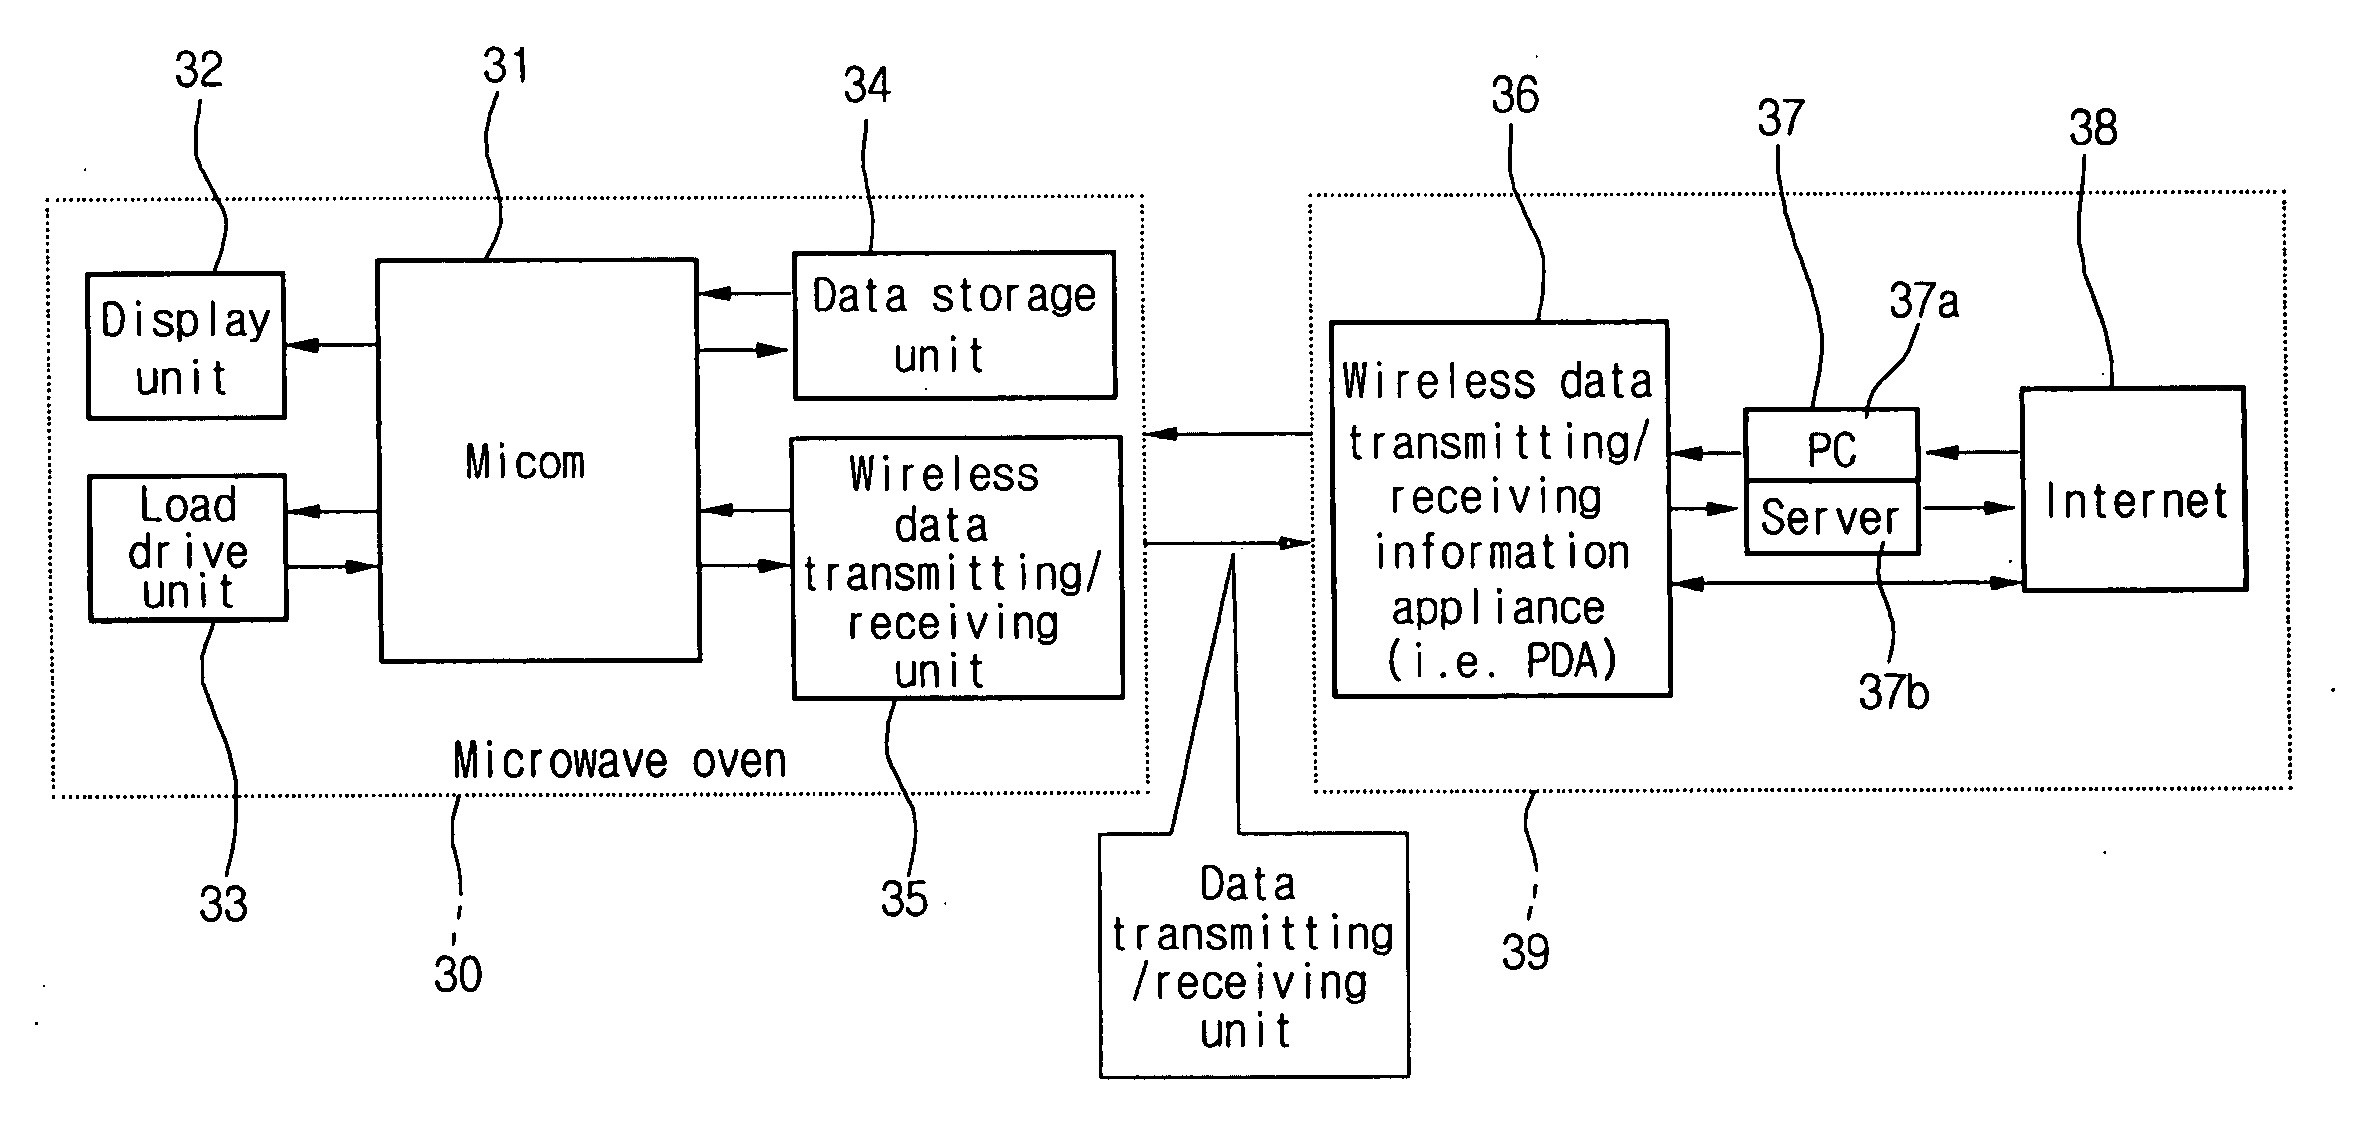 Apparatus and method for transmitting and receiving data in microwave oven